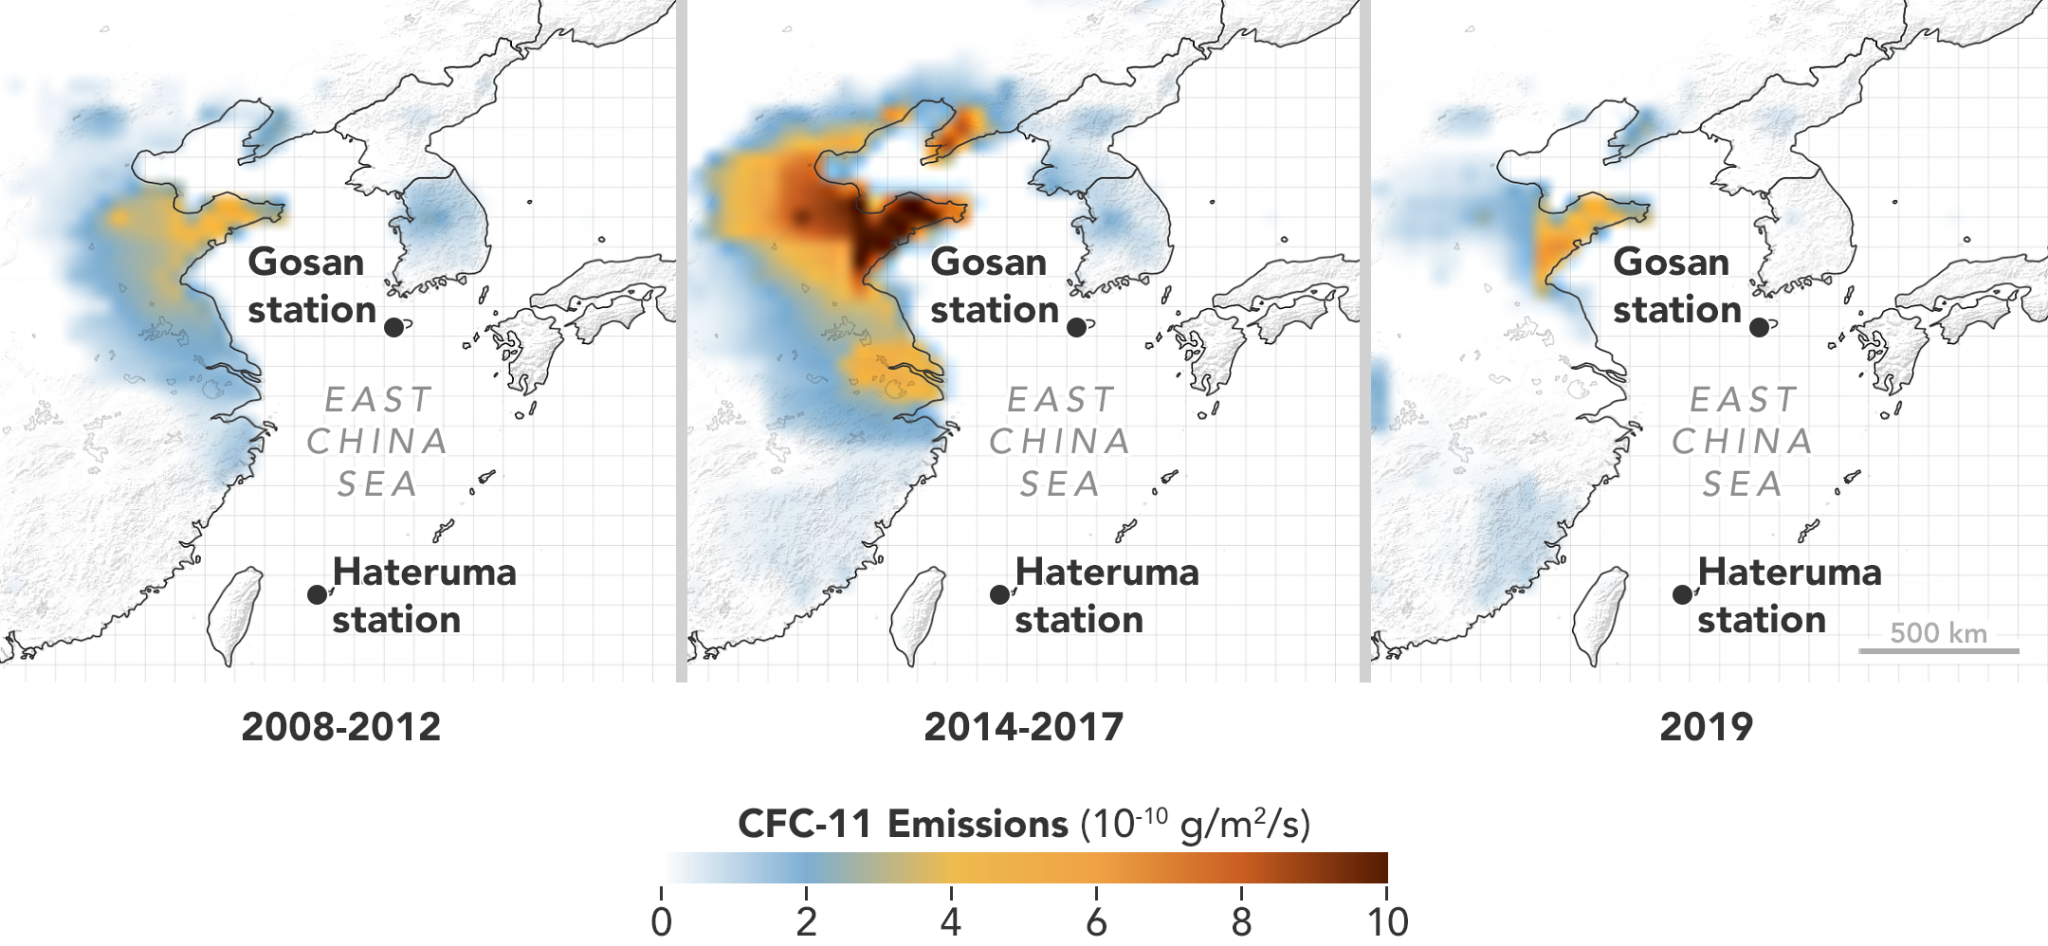 A map of stations showing the increase in CFC-11 emissions and the drop that followed their detection.